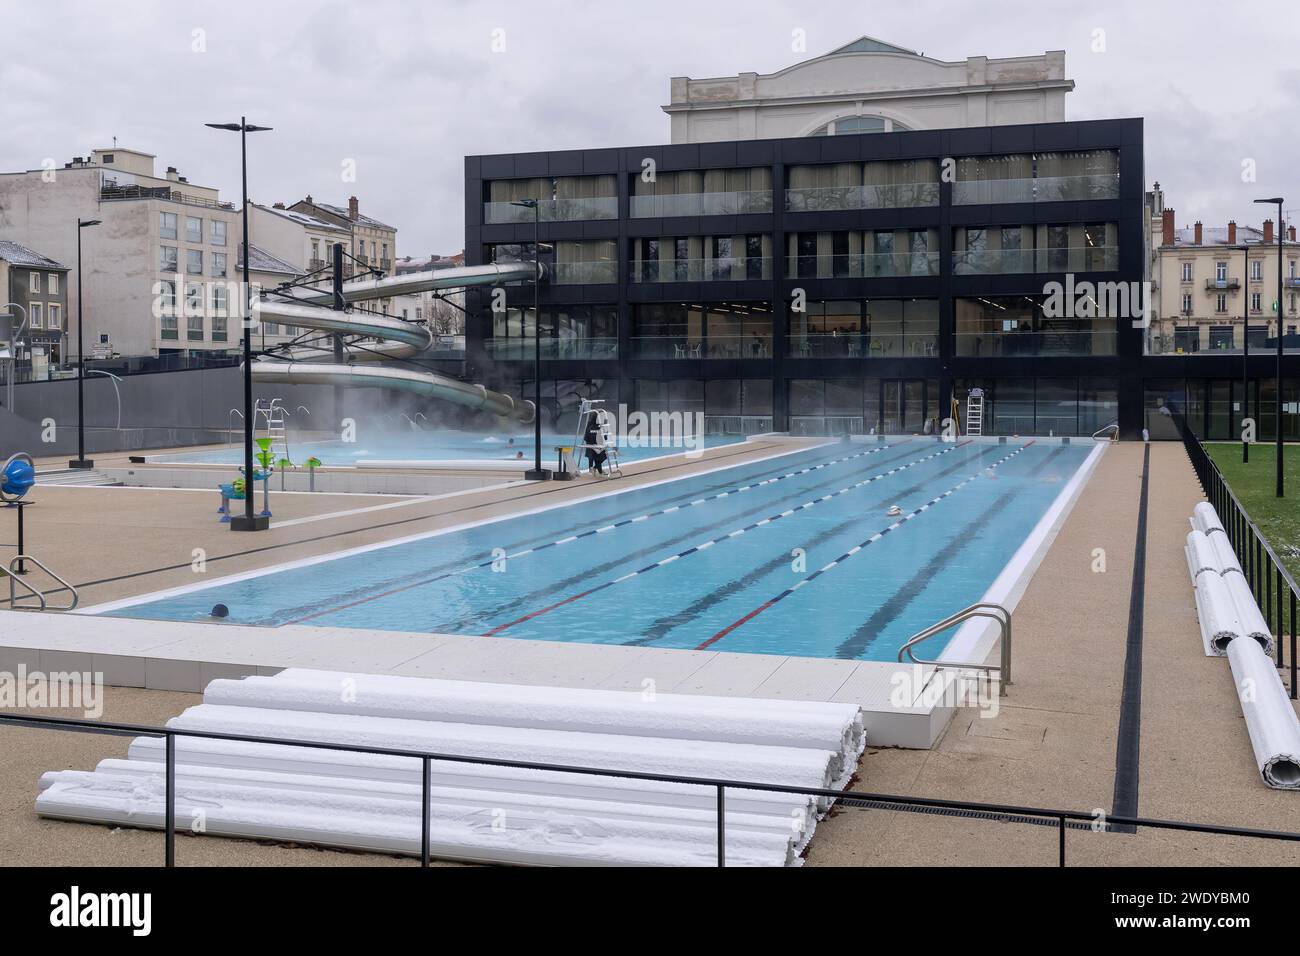 Nancy, France - Focus on the outdoor swimming pools of the Nancy Thermal complex with their hot water coming from the thermal spring. Stock Photo